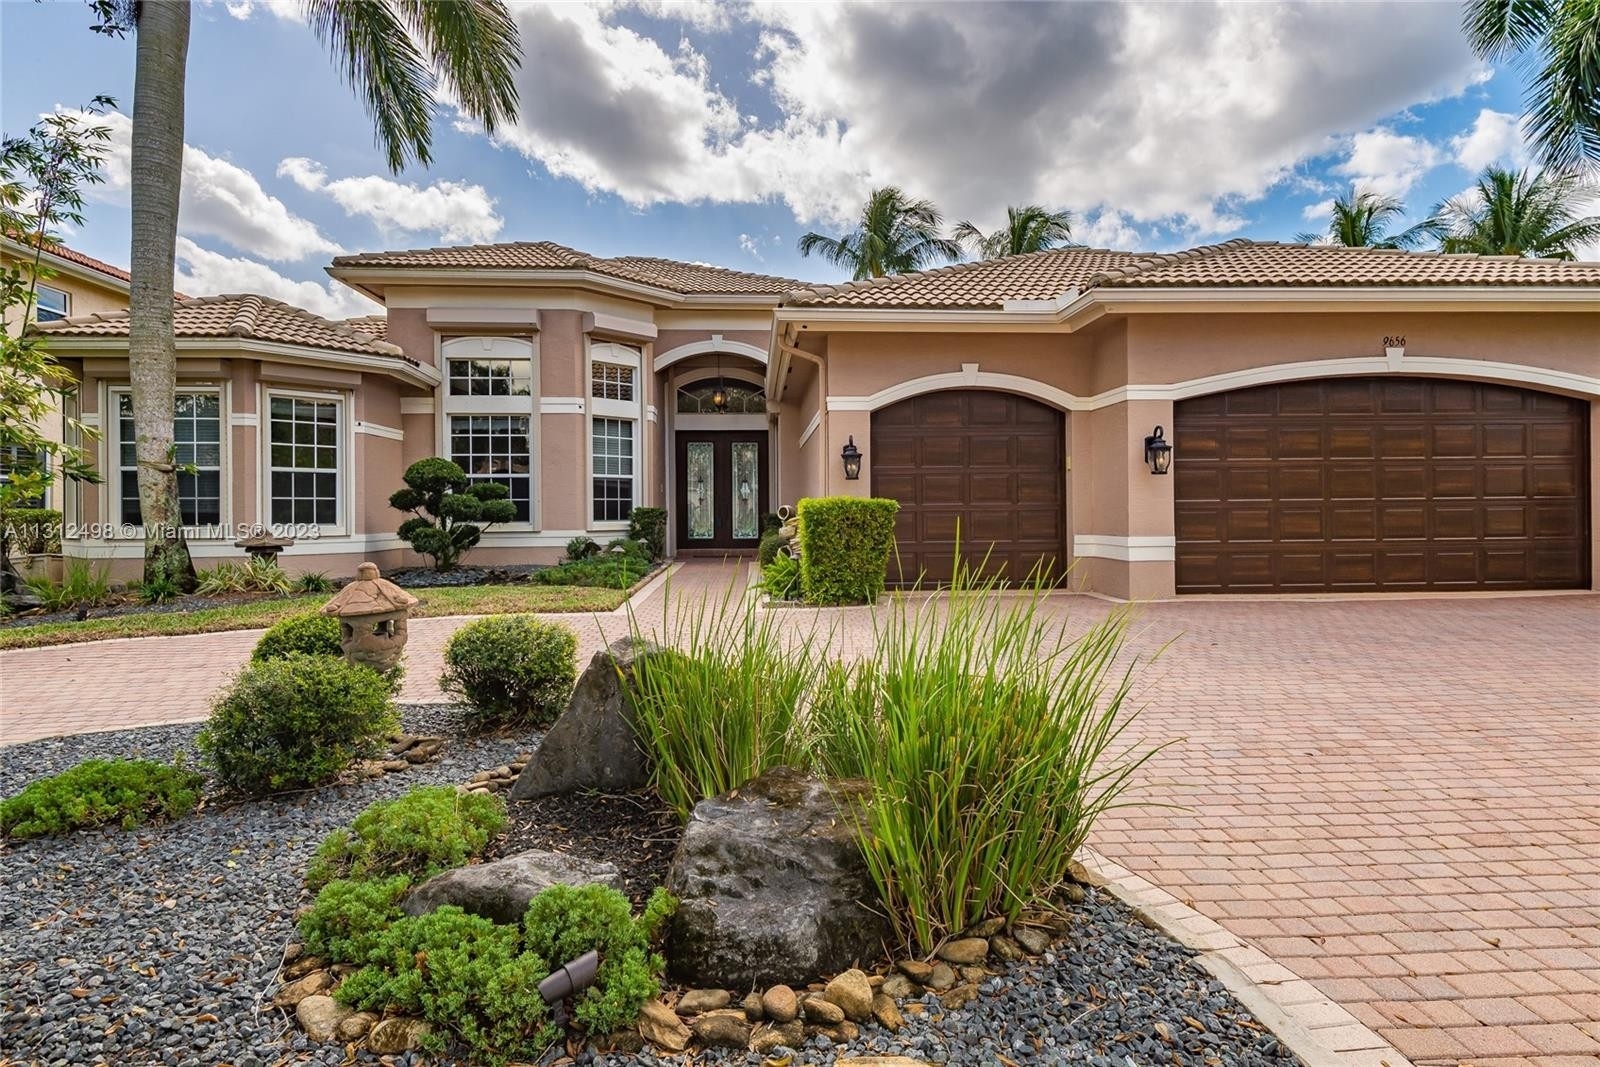 Single Family Home for Sale at Delray Beach, FL 33446